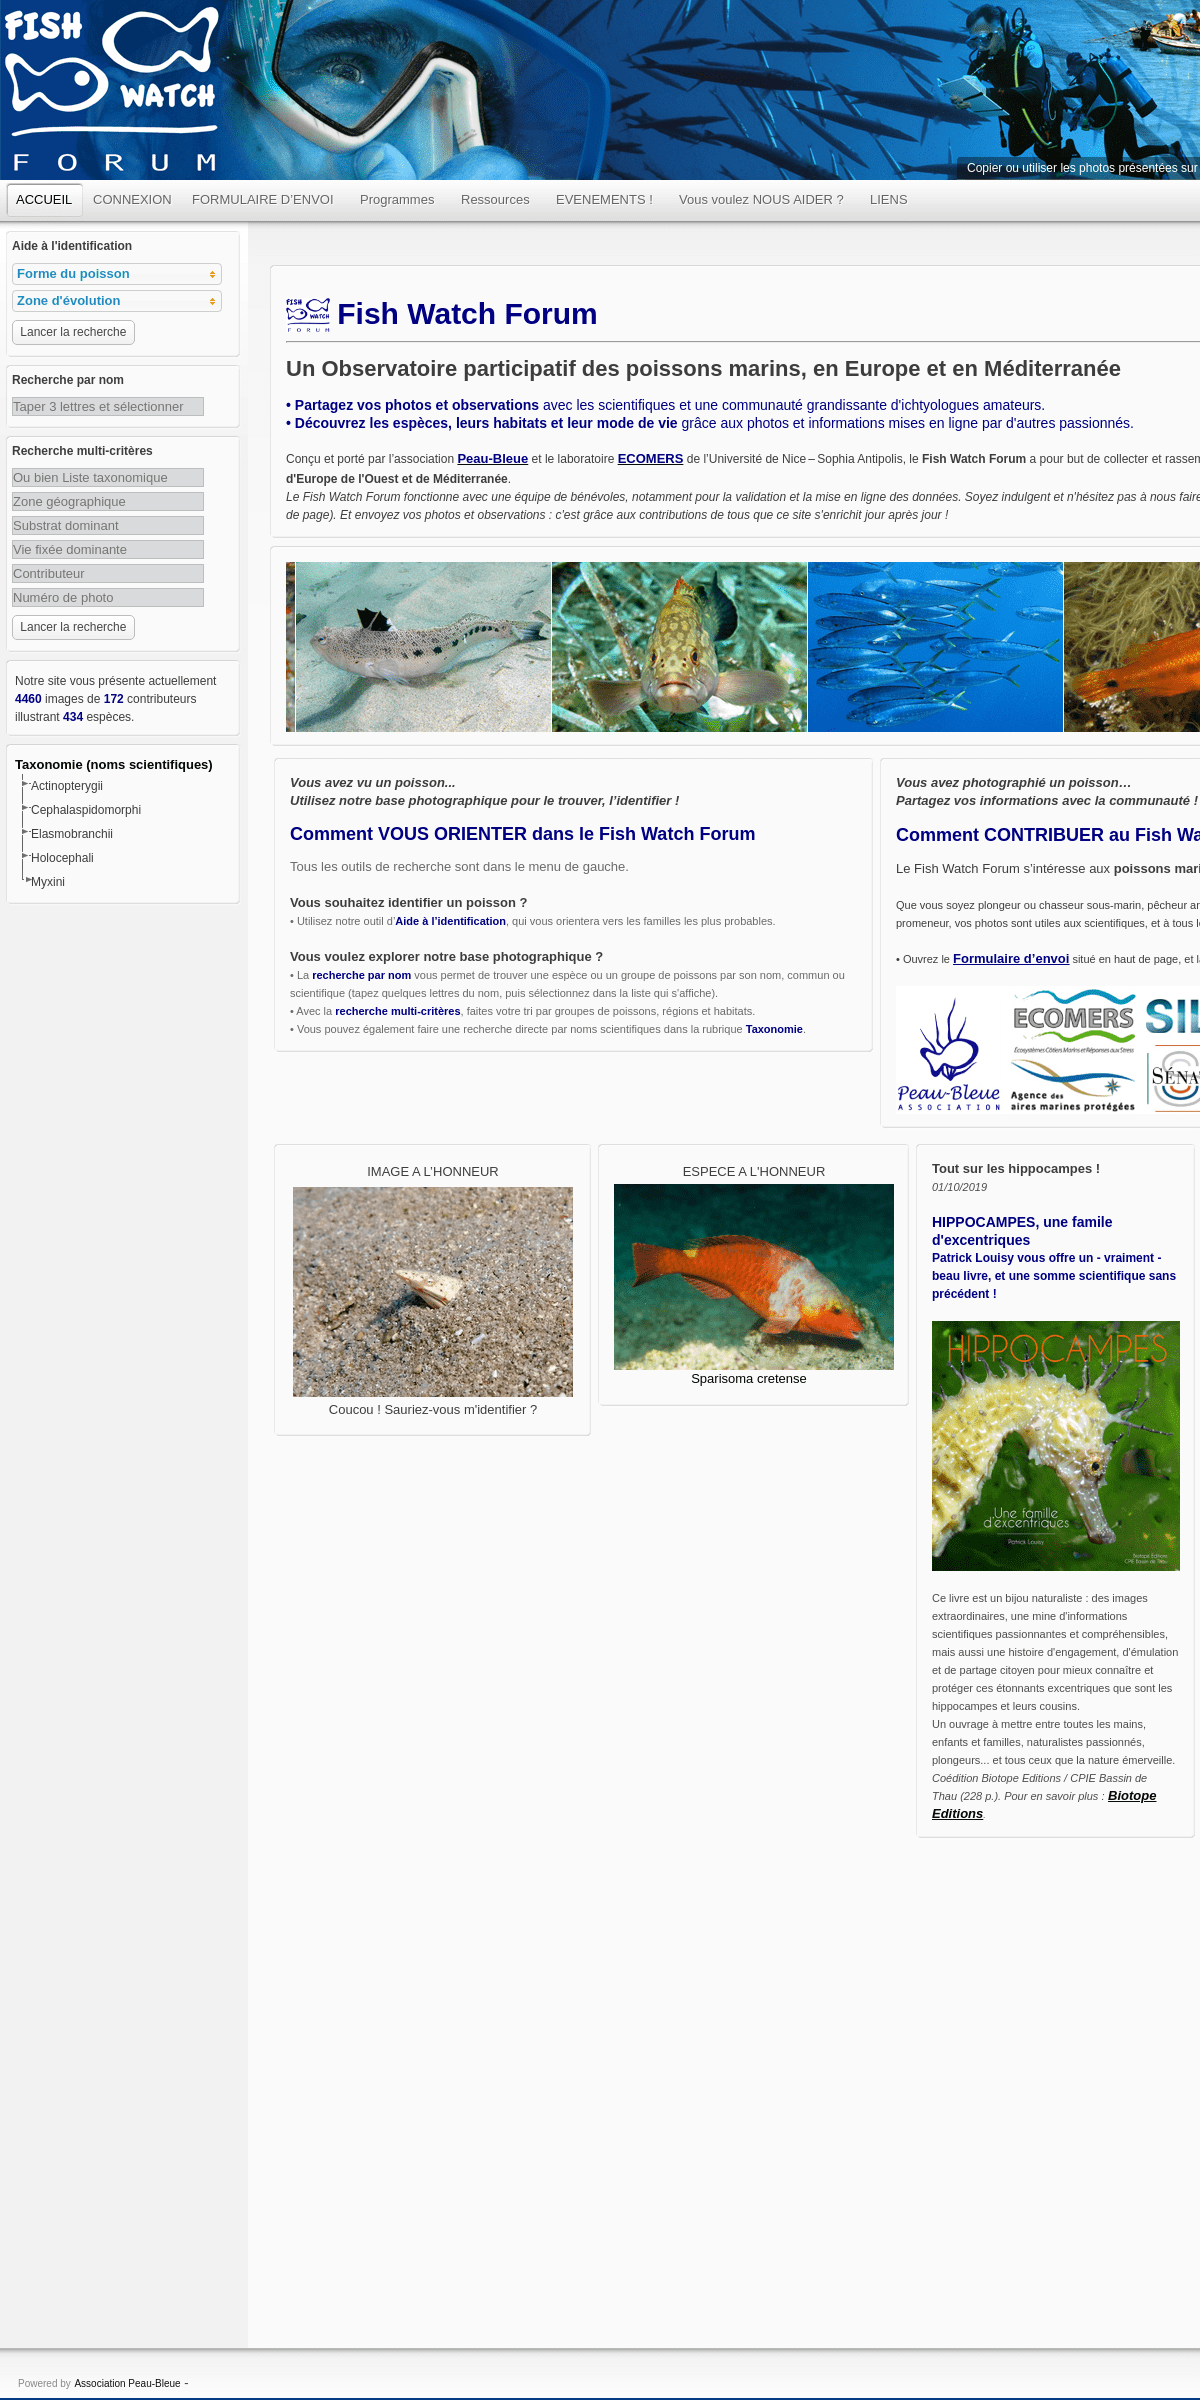 A complete backup of fish-watch.org